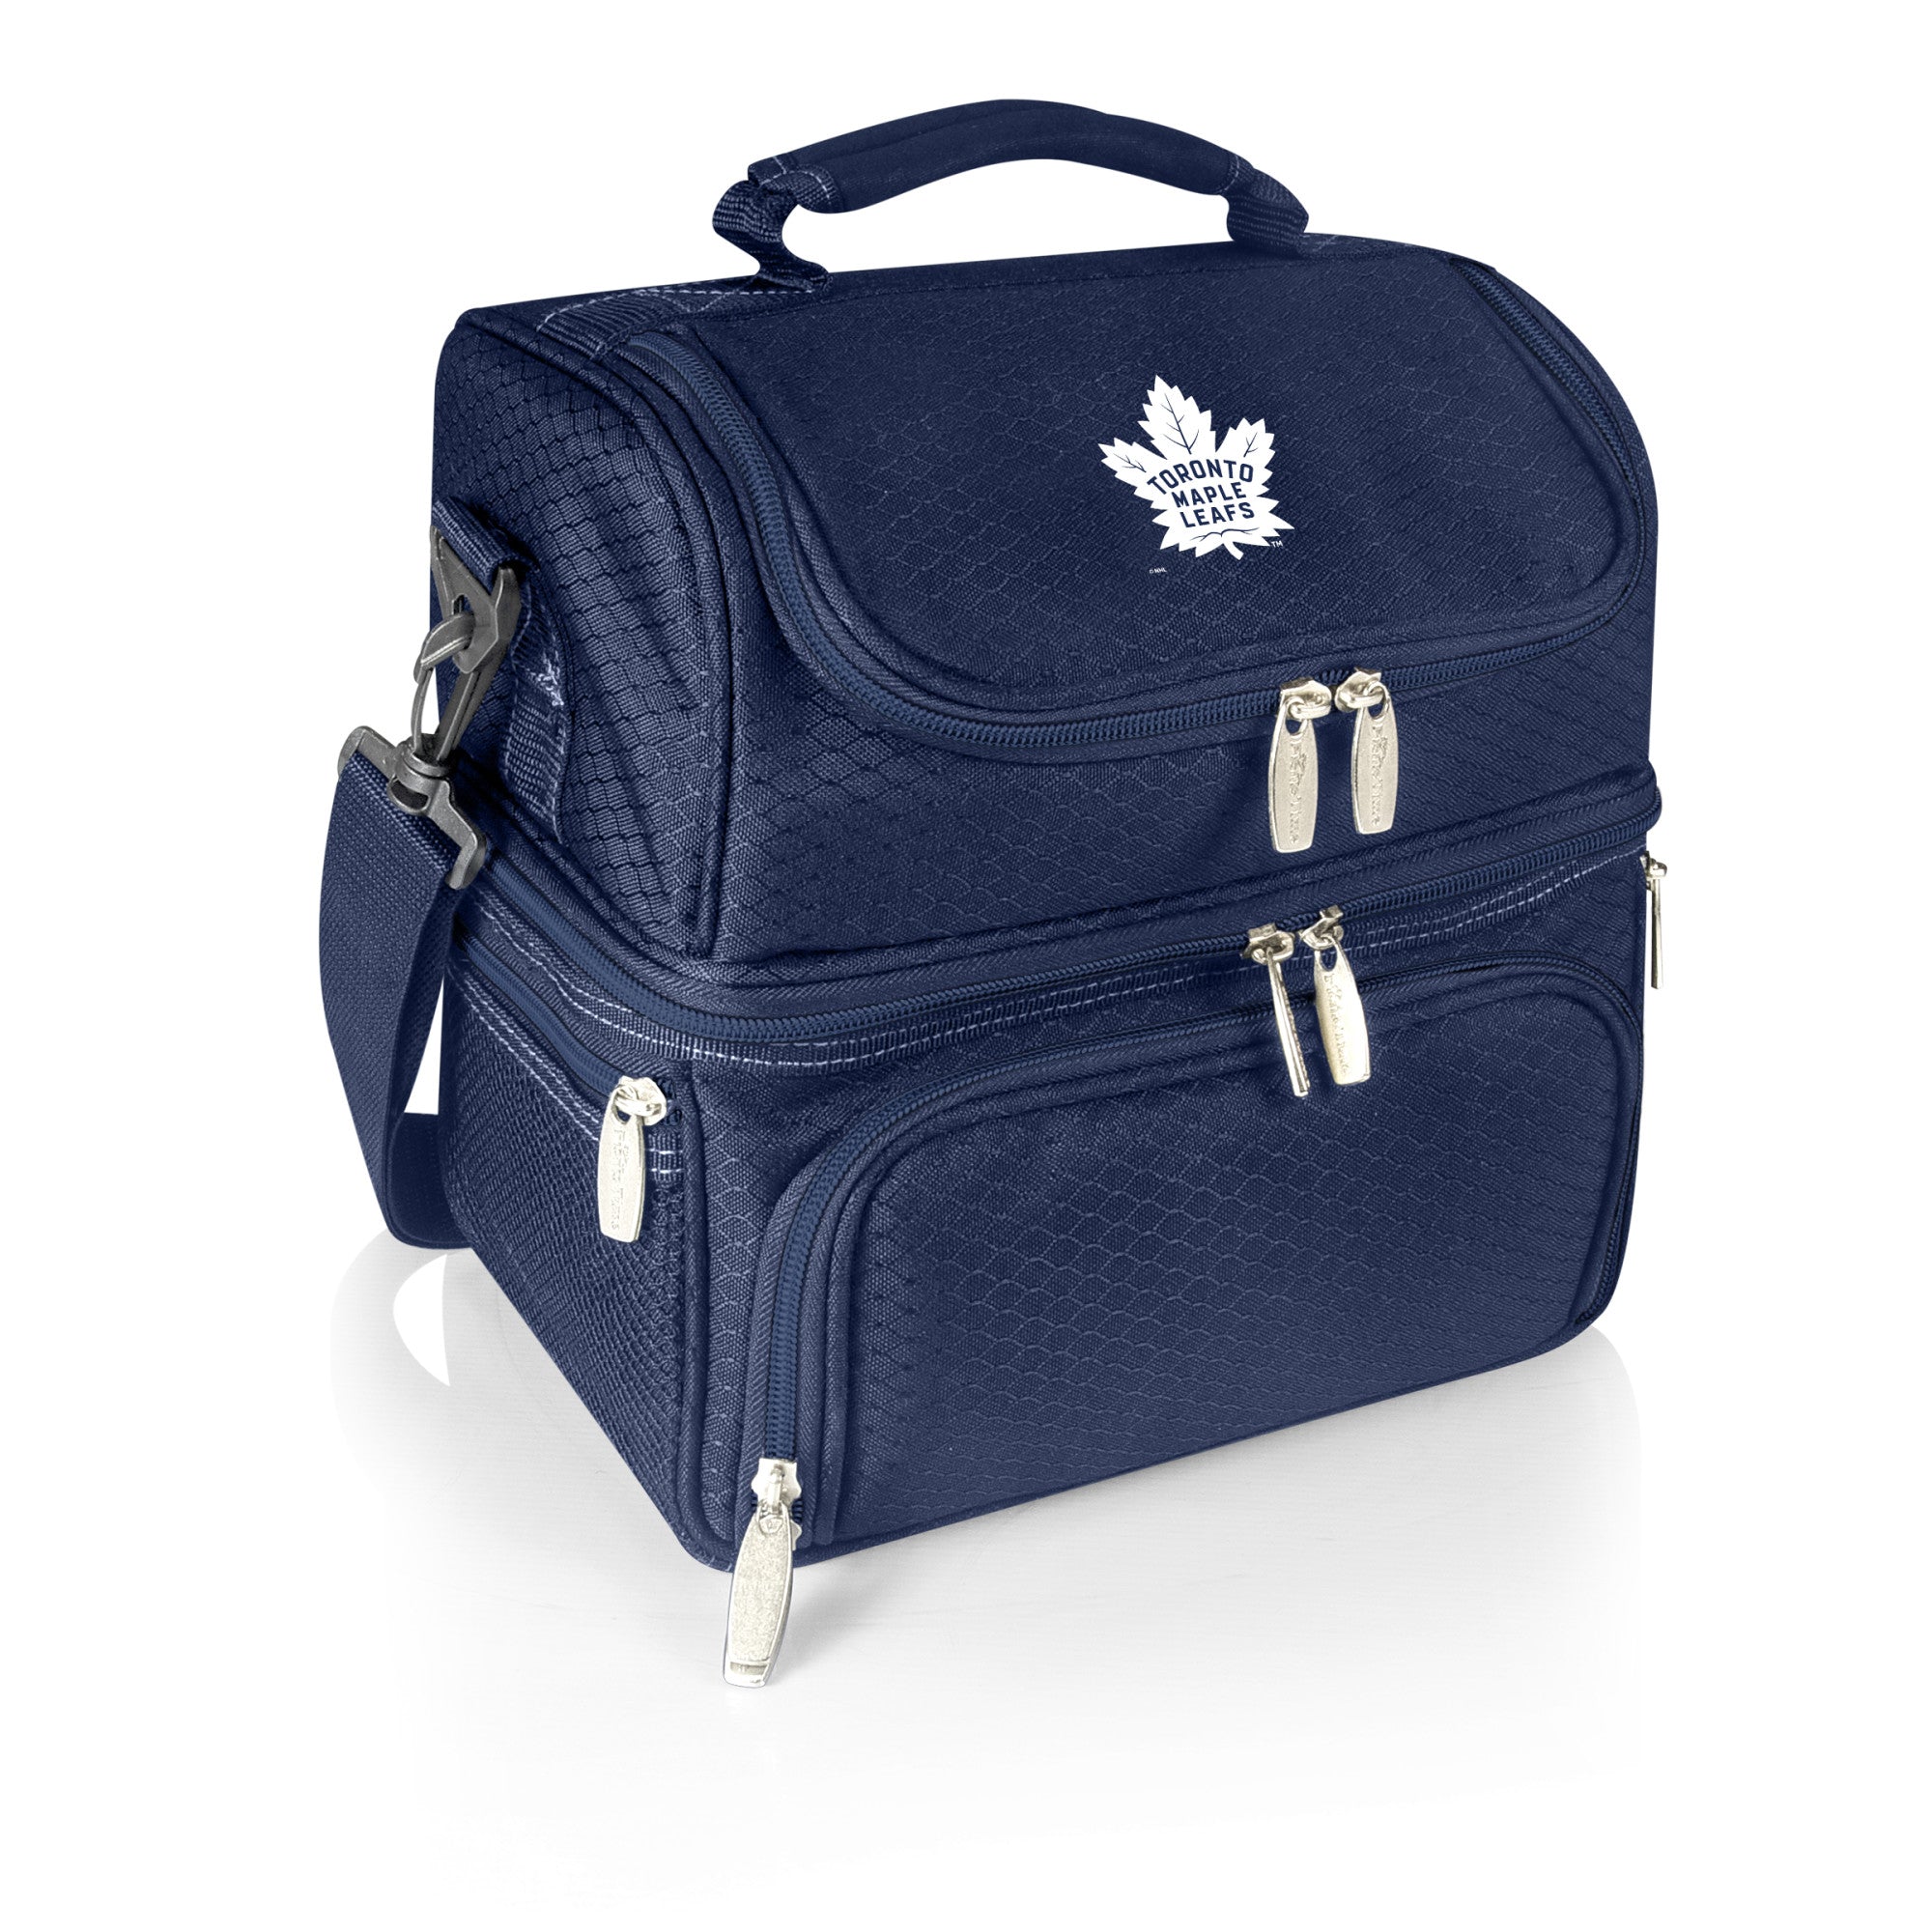 Toronto Maple Leafs - Pranzo Lunch Bag Cooler with Utensils